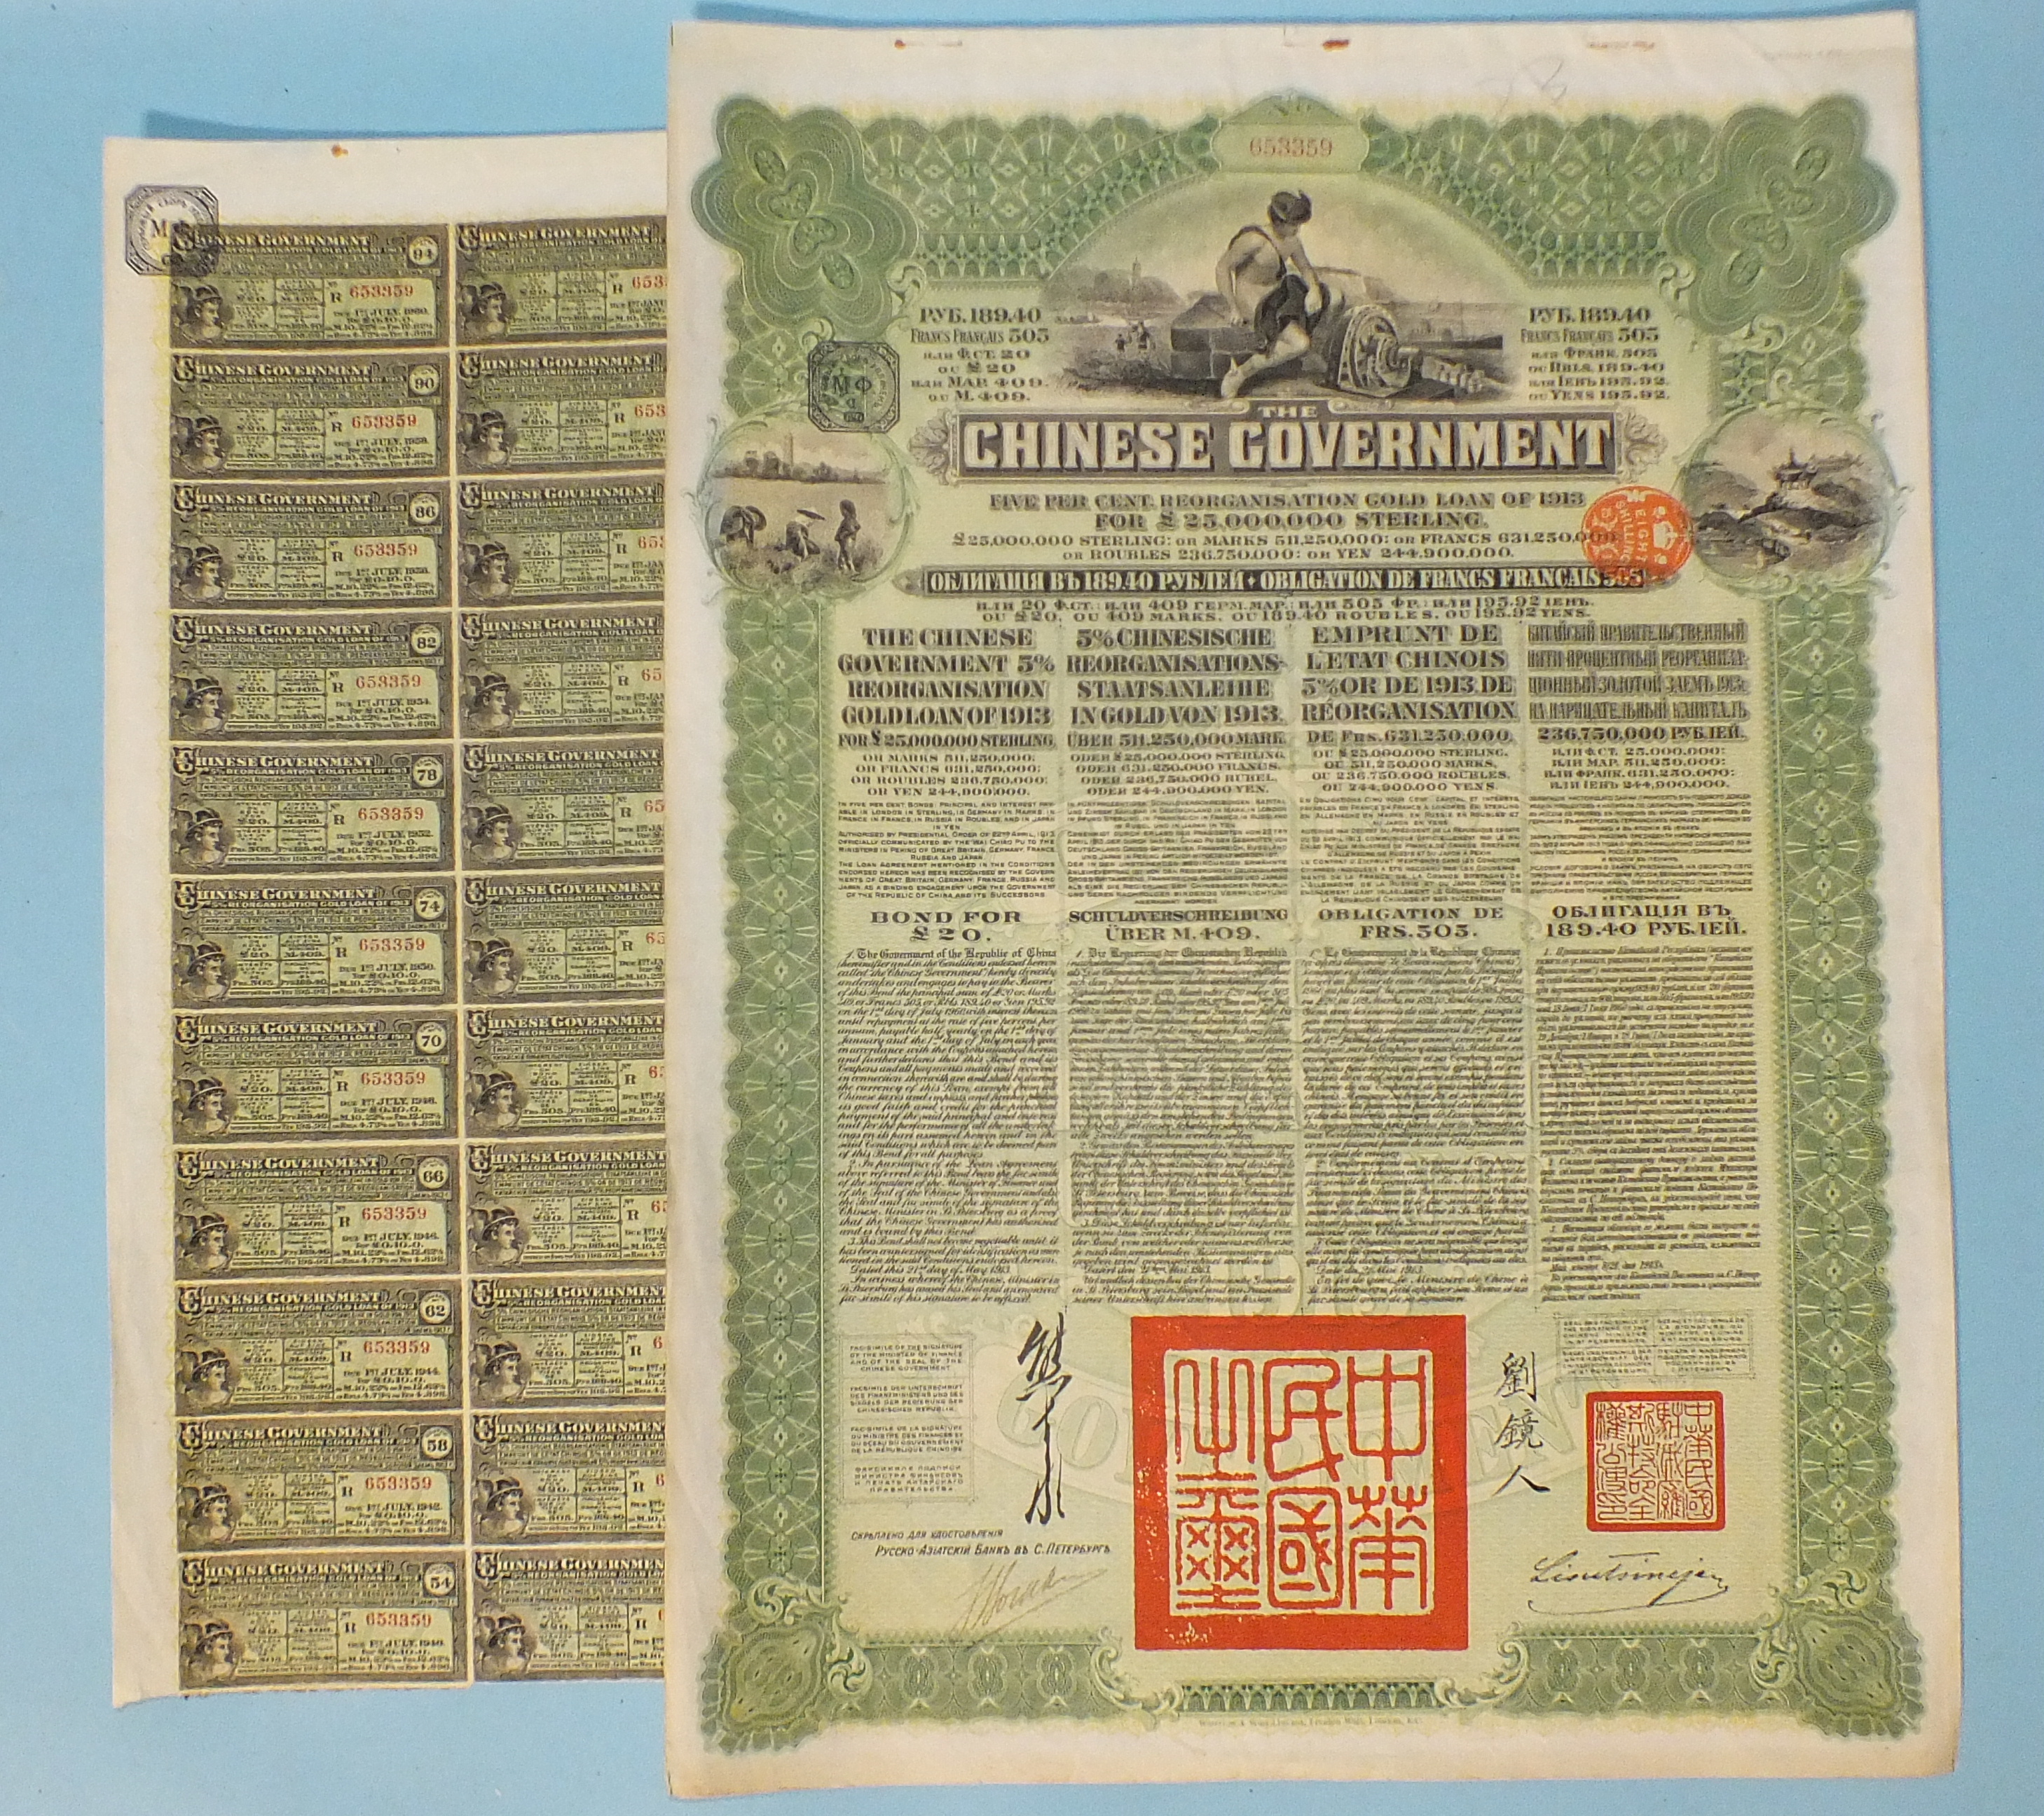 Chinese Government £20 1913 5% Reorganisation Gold Loan Bond No. 653359, with 43 coupons.